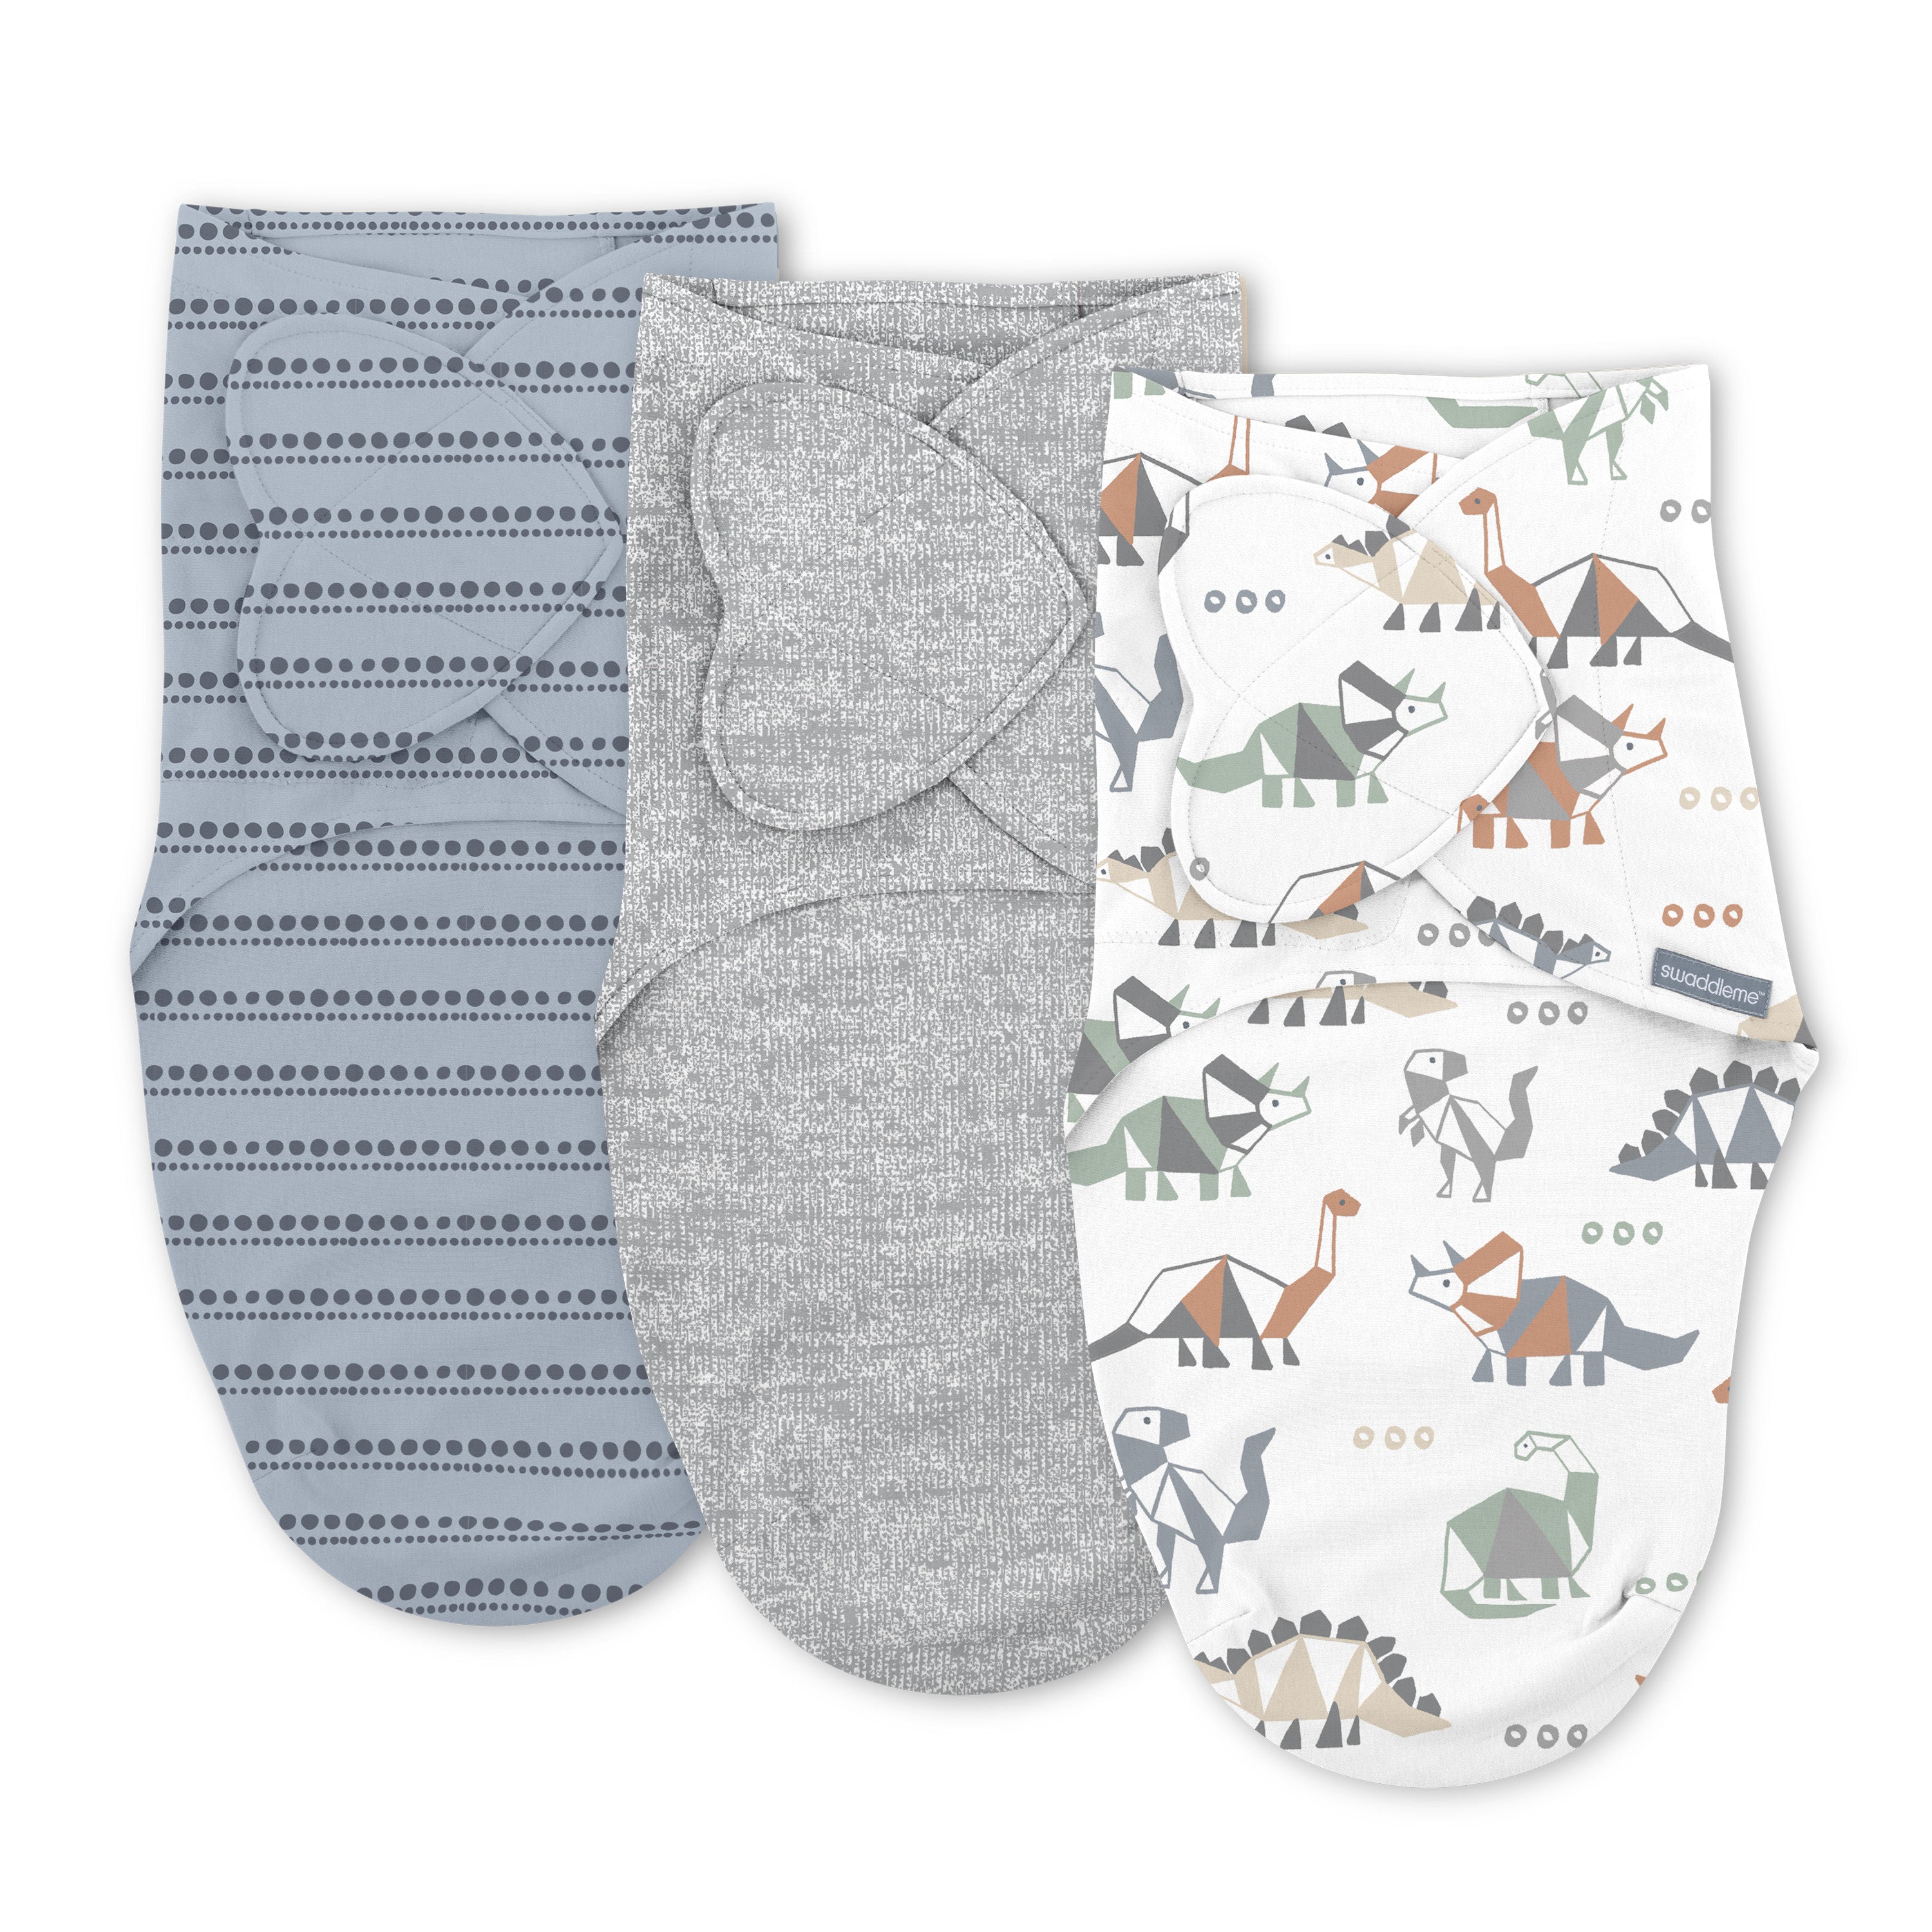 Easy Change Swaddle, Size SM, 0-3 months, 2pk (I love You) – Kids2